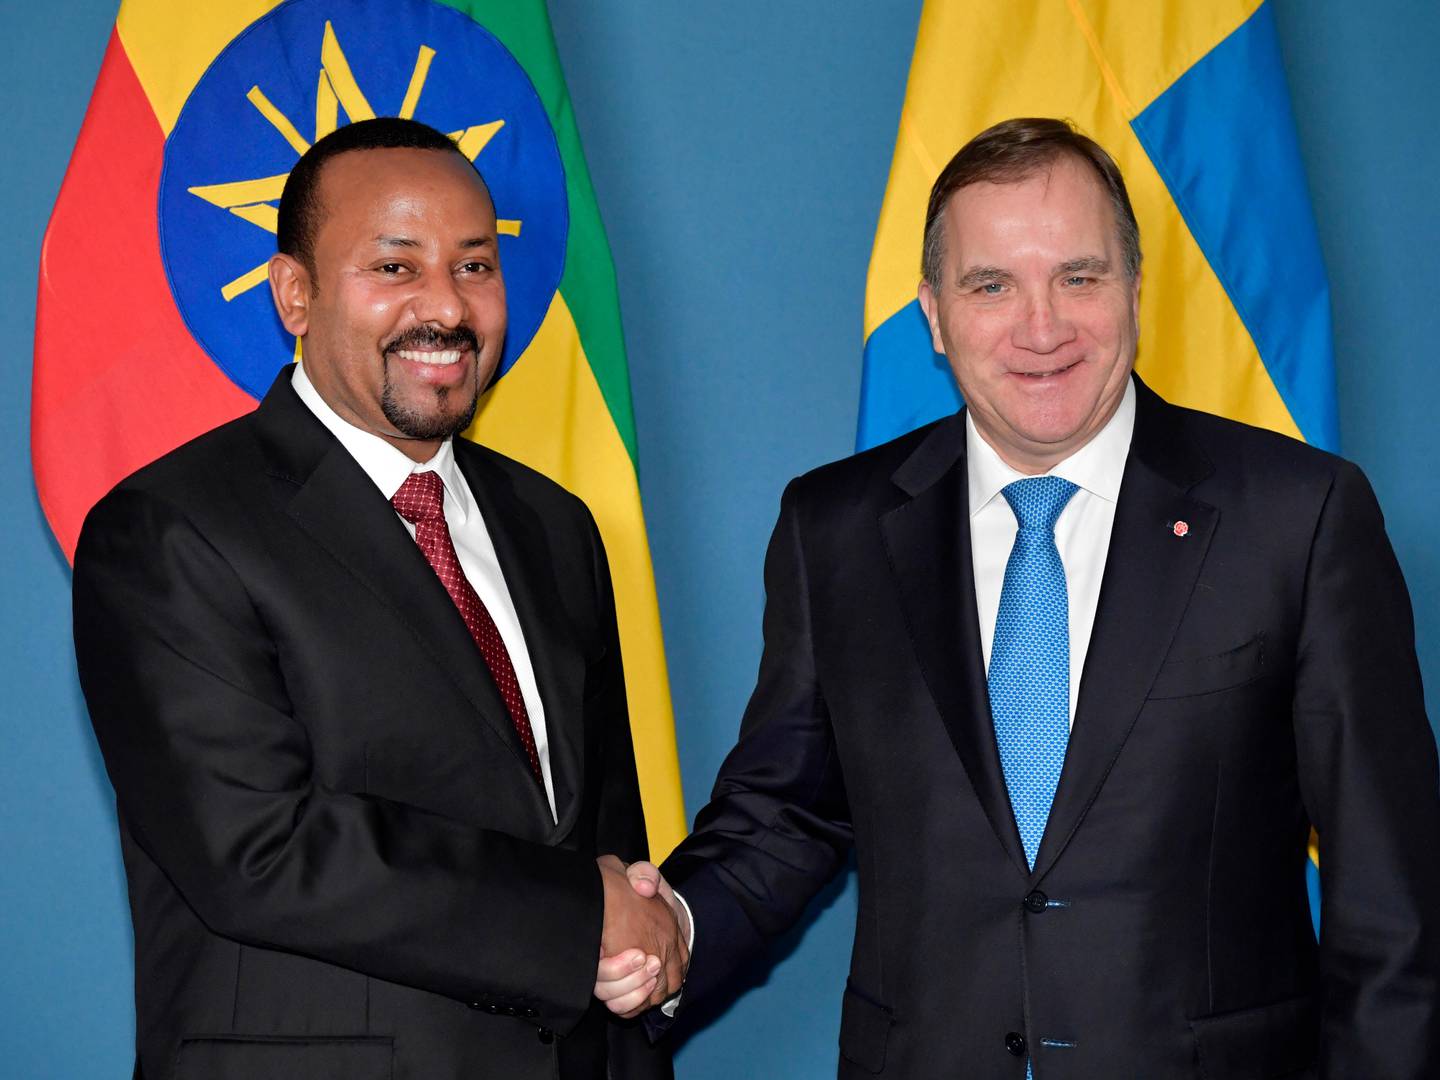 Sweden's Prime Minister Stefan Lofven, right, welcomes Ethiopia's Prime Minister Abiy Ahmed Ali for a meeting in Stockholm, Sweden, Monday Dec. 9, 2019. (Anders Wiklund/TT via AP)